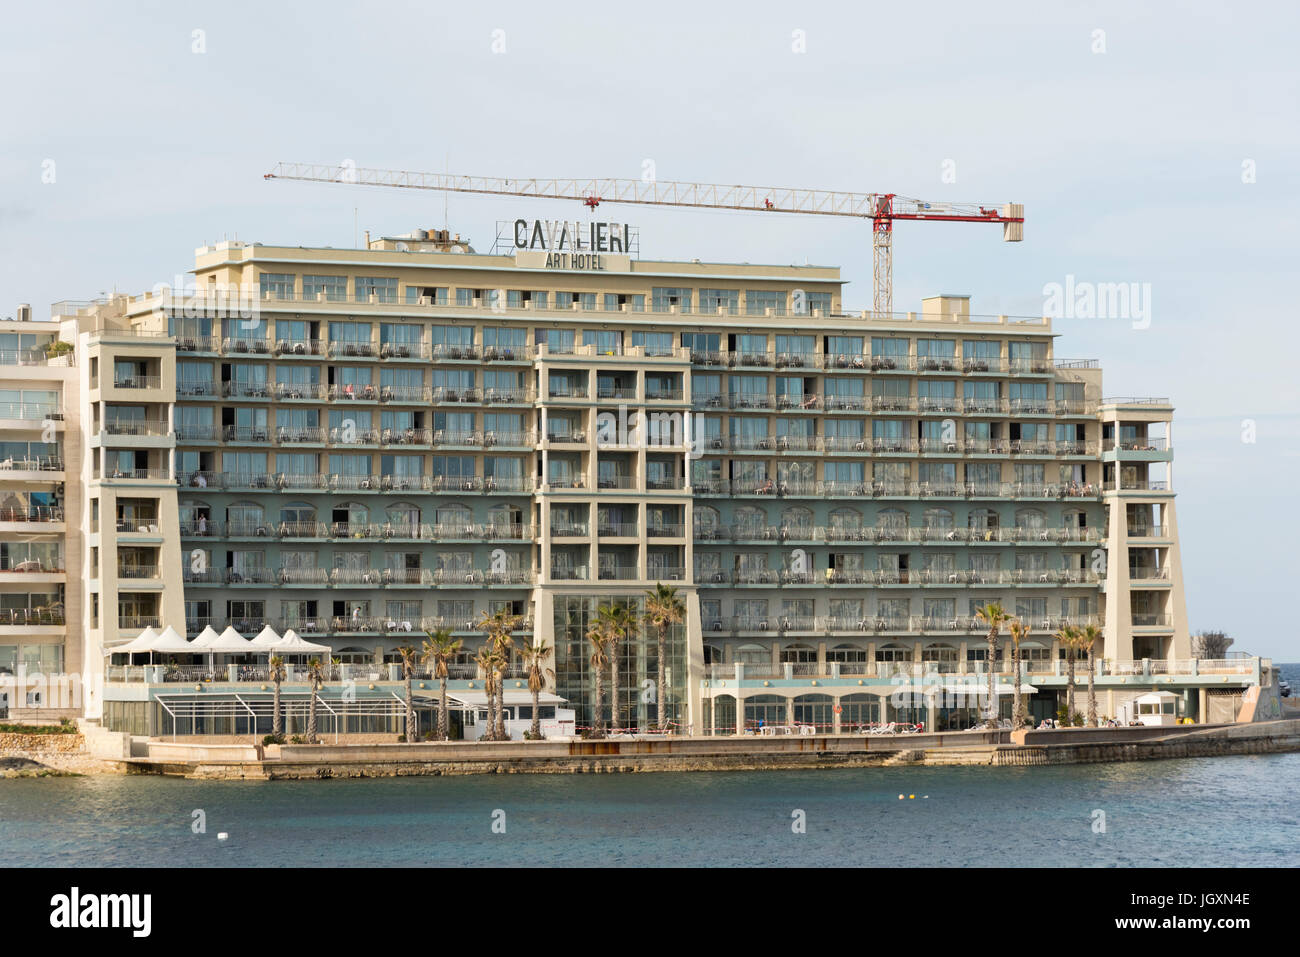 Cavalieri Hotel High Resolution Stock Photography And Images Alamy